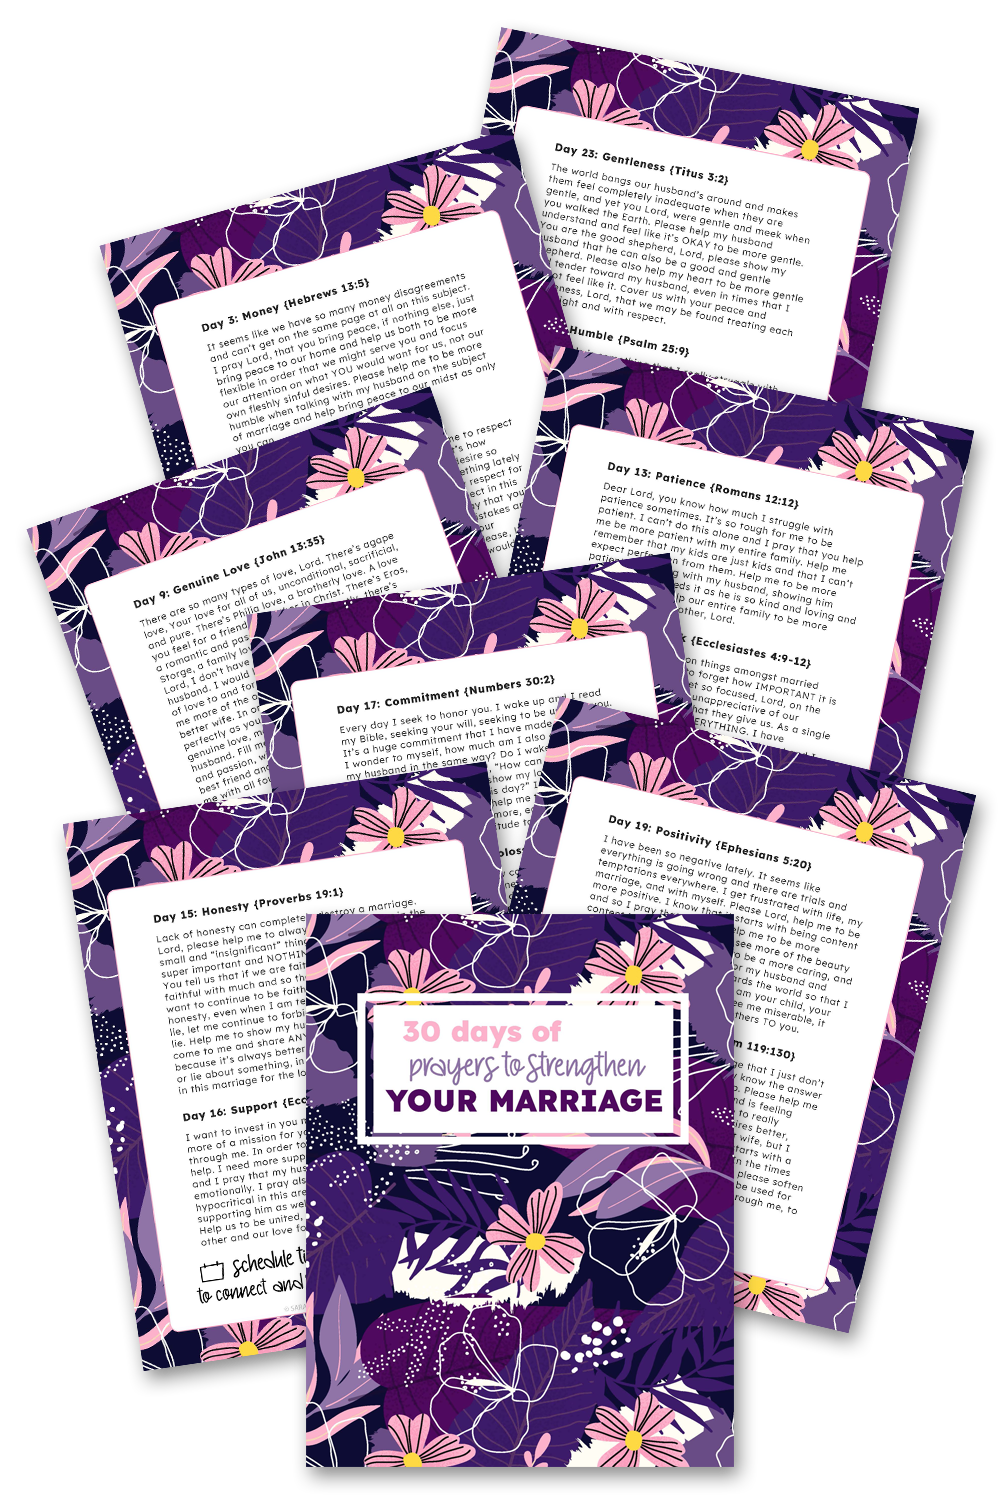 30 Days of Prayer to Strengthen Your Marriage Binder